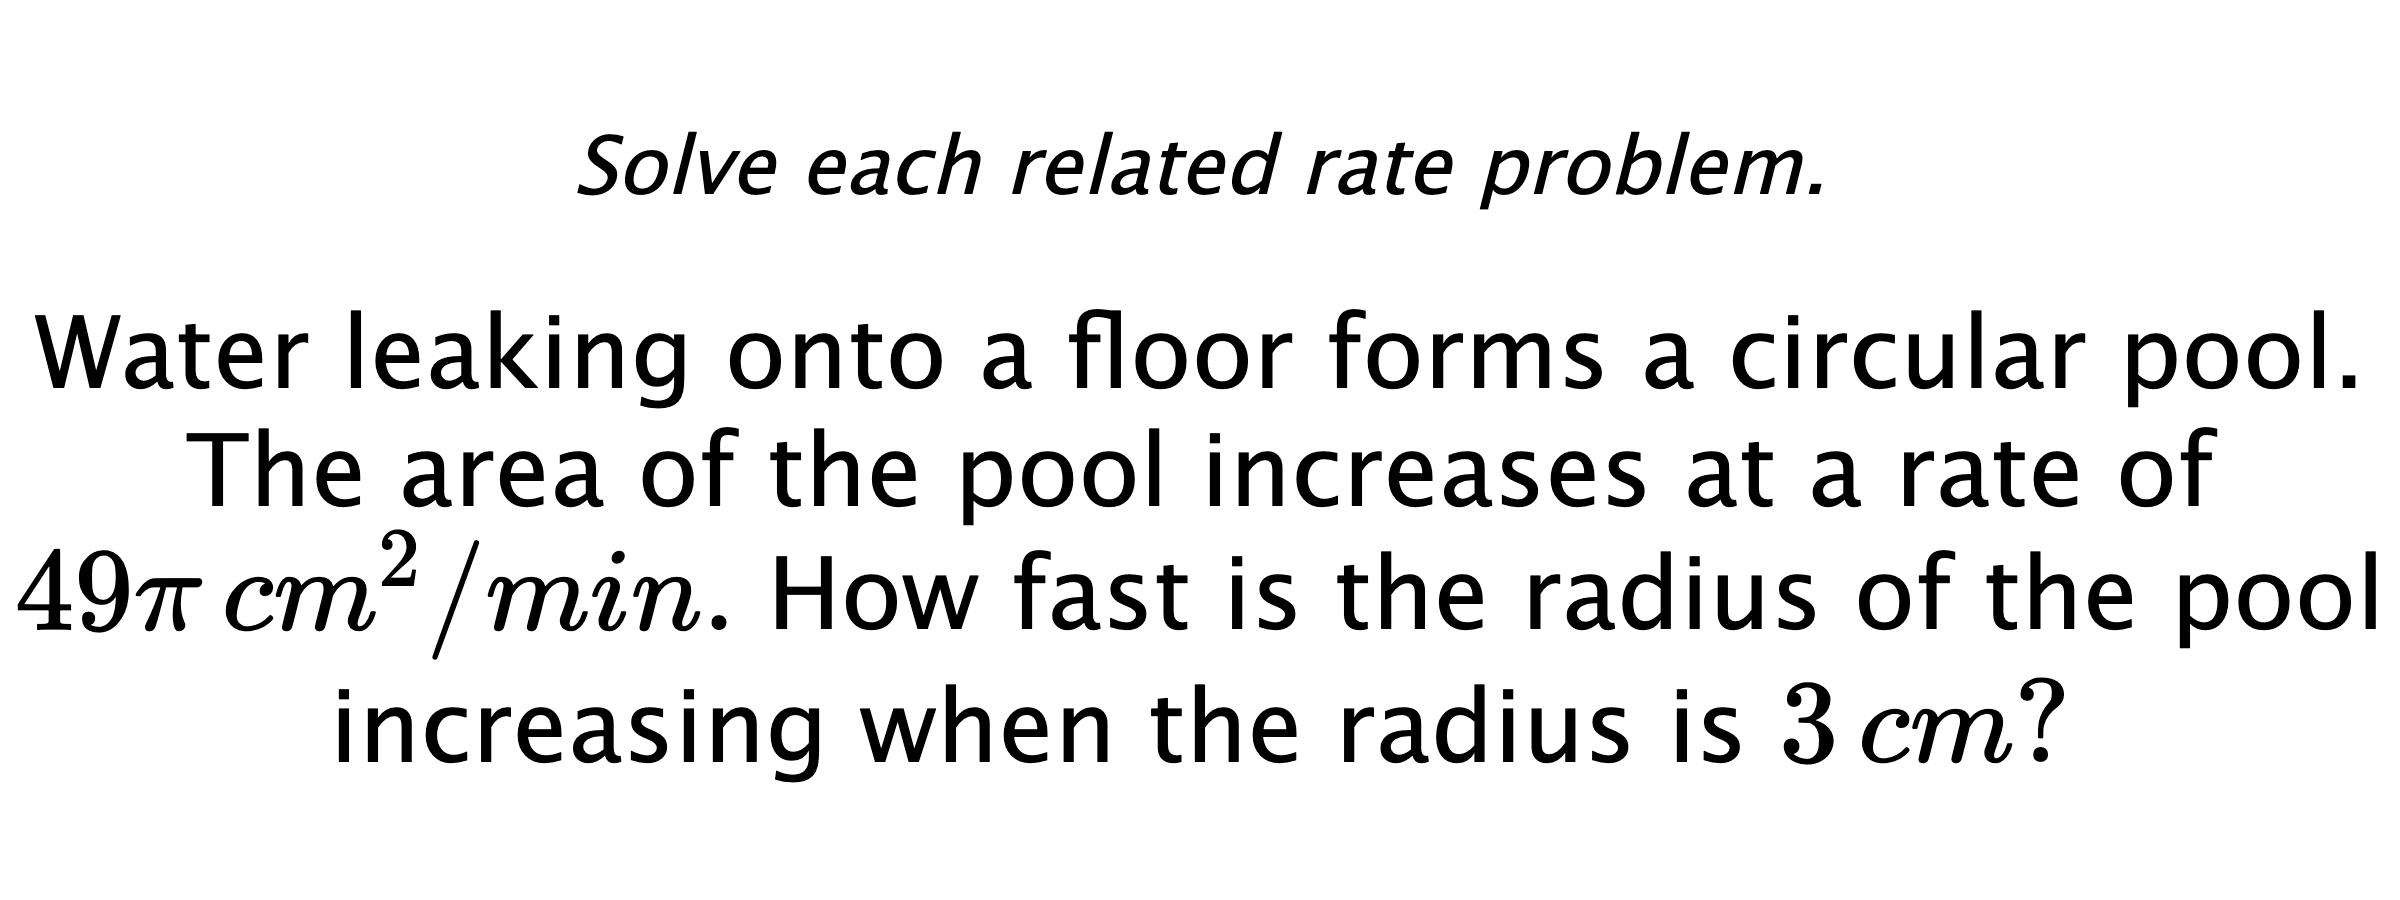 Solve each related rate problem. Water leaking onto a floor forms a circular pool. The area of the pool increases at a rate of $49\pi\,cm^{2}/min.$  How fast is the radius of the pool increasing when the radius is $3\,cm?$